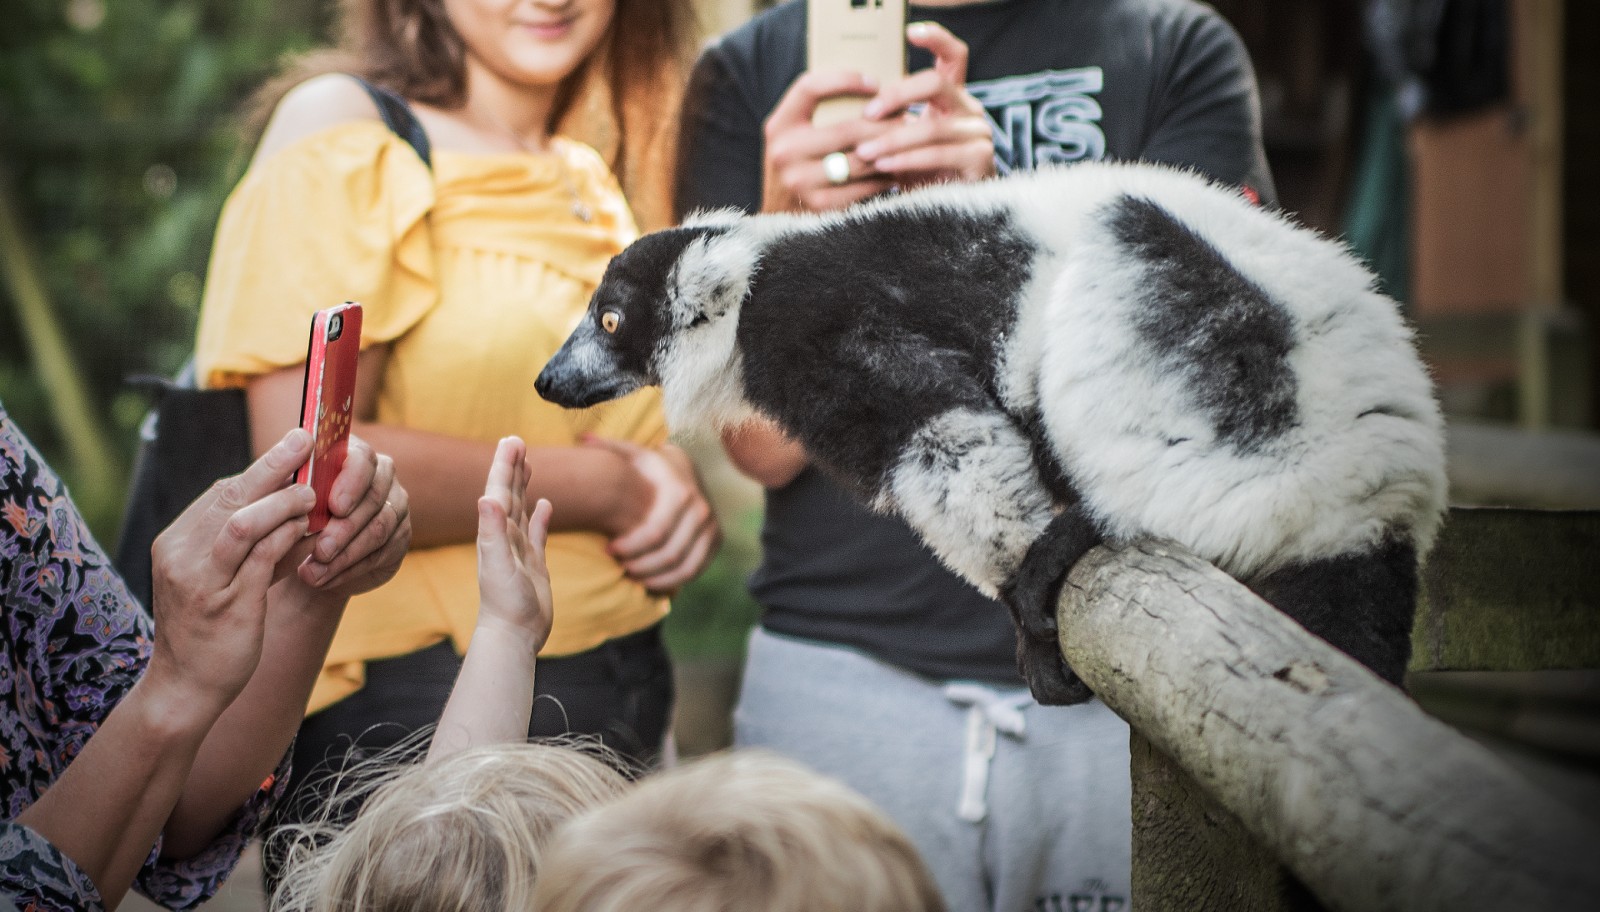 A photo showing a crowd of people at a zoo taking a photo of a lemur on their mobile phones